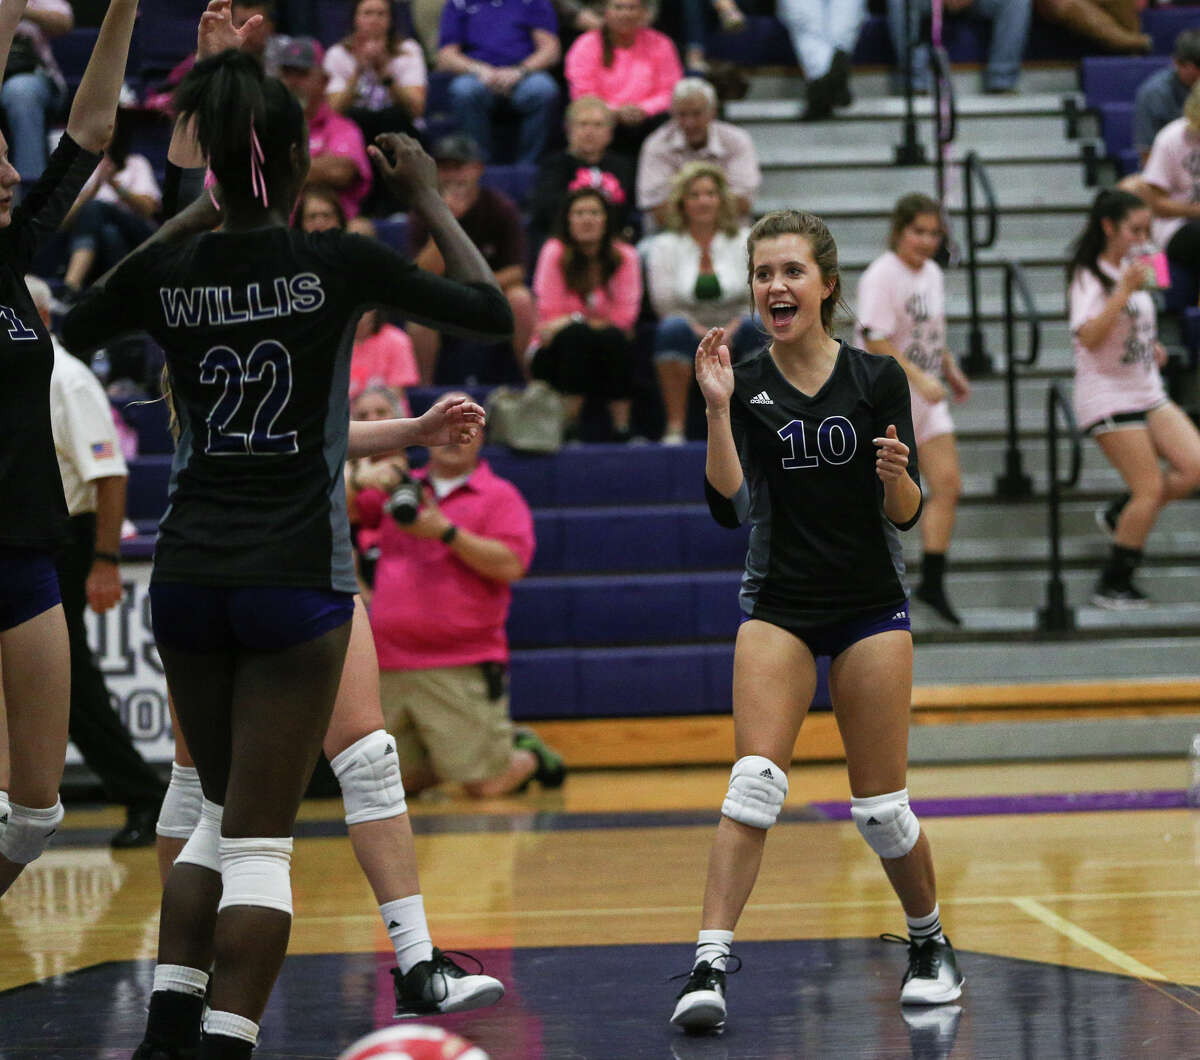 Willis' Kylie Debrowski (10) celebrates during the varsity volleyball game against Huntsville on Tuesday, Oct. 25, 2016, at Willis High School. (Michael Minasi / Chronicle)